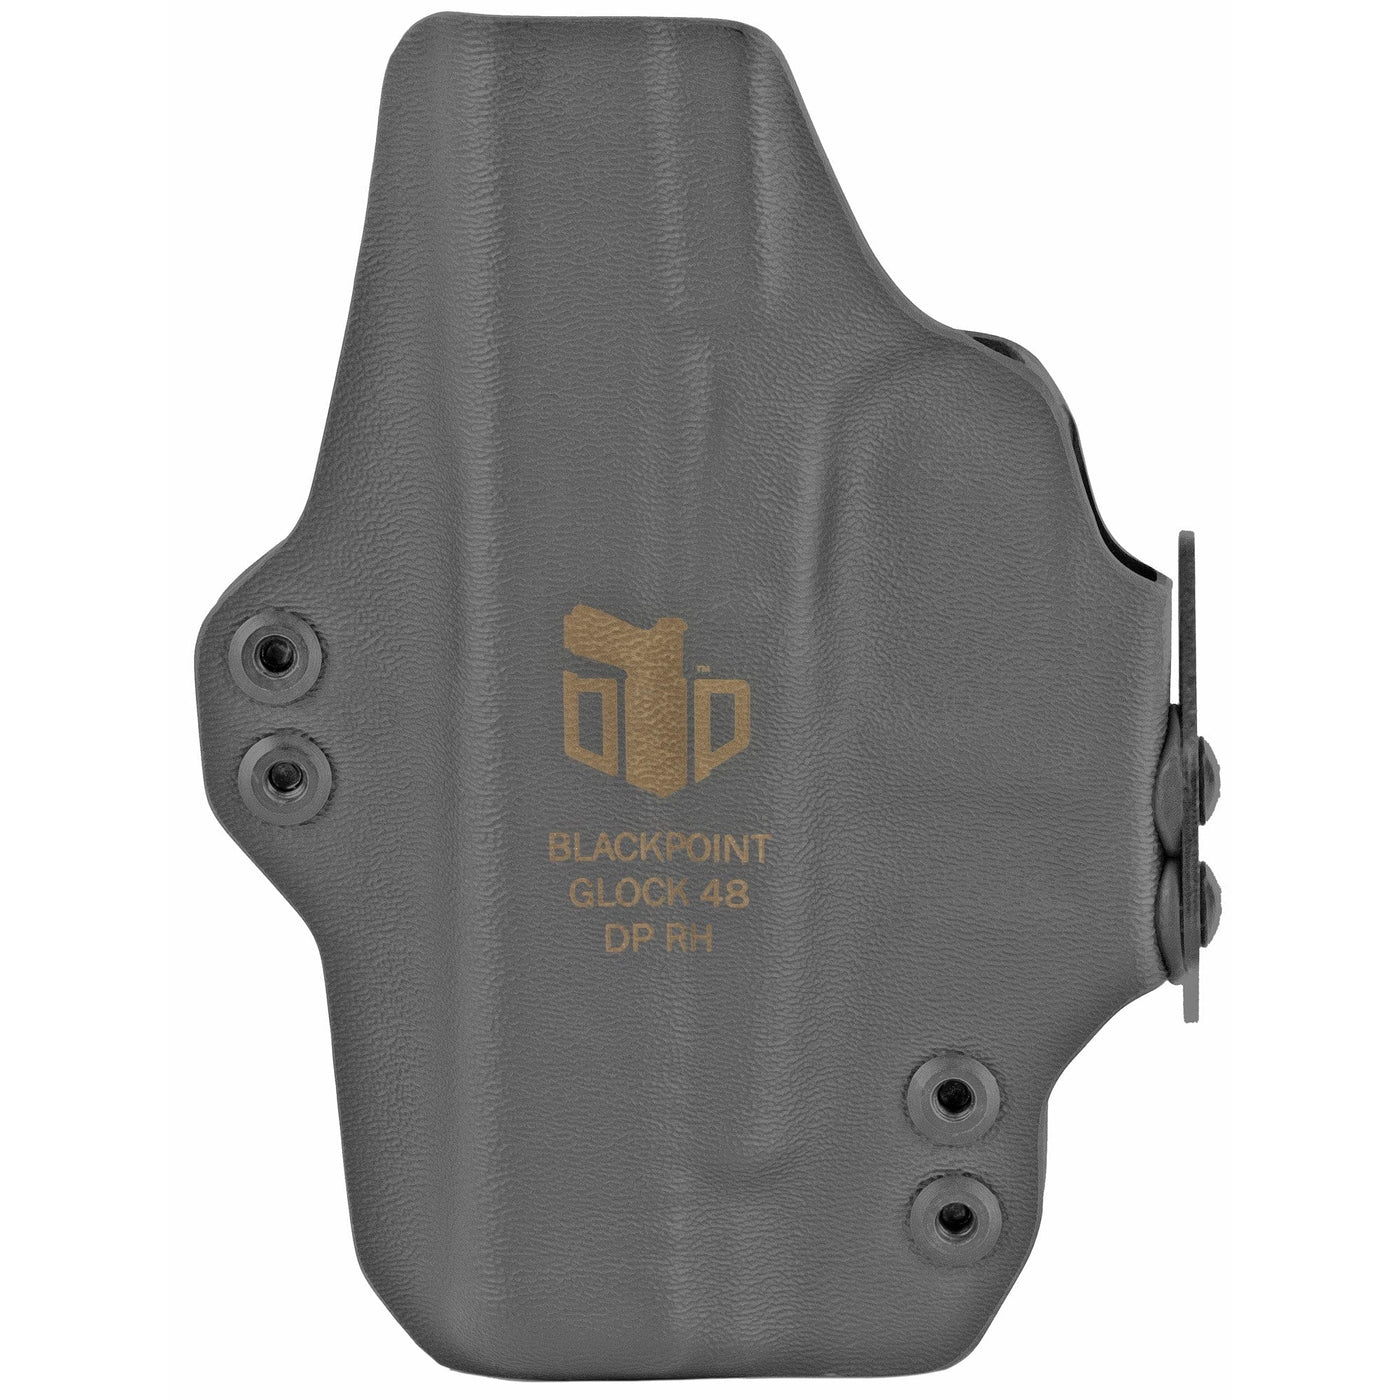 BlackPoint Tactical Blk Pnt Dual Point Aiwb For Glk 48 Holsters